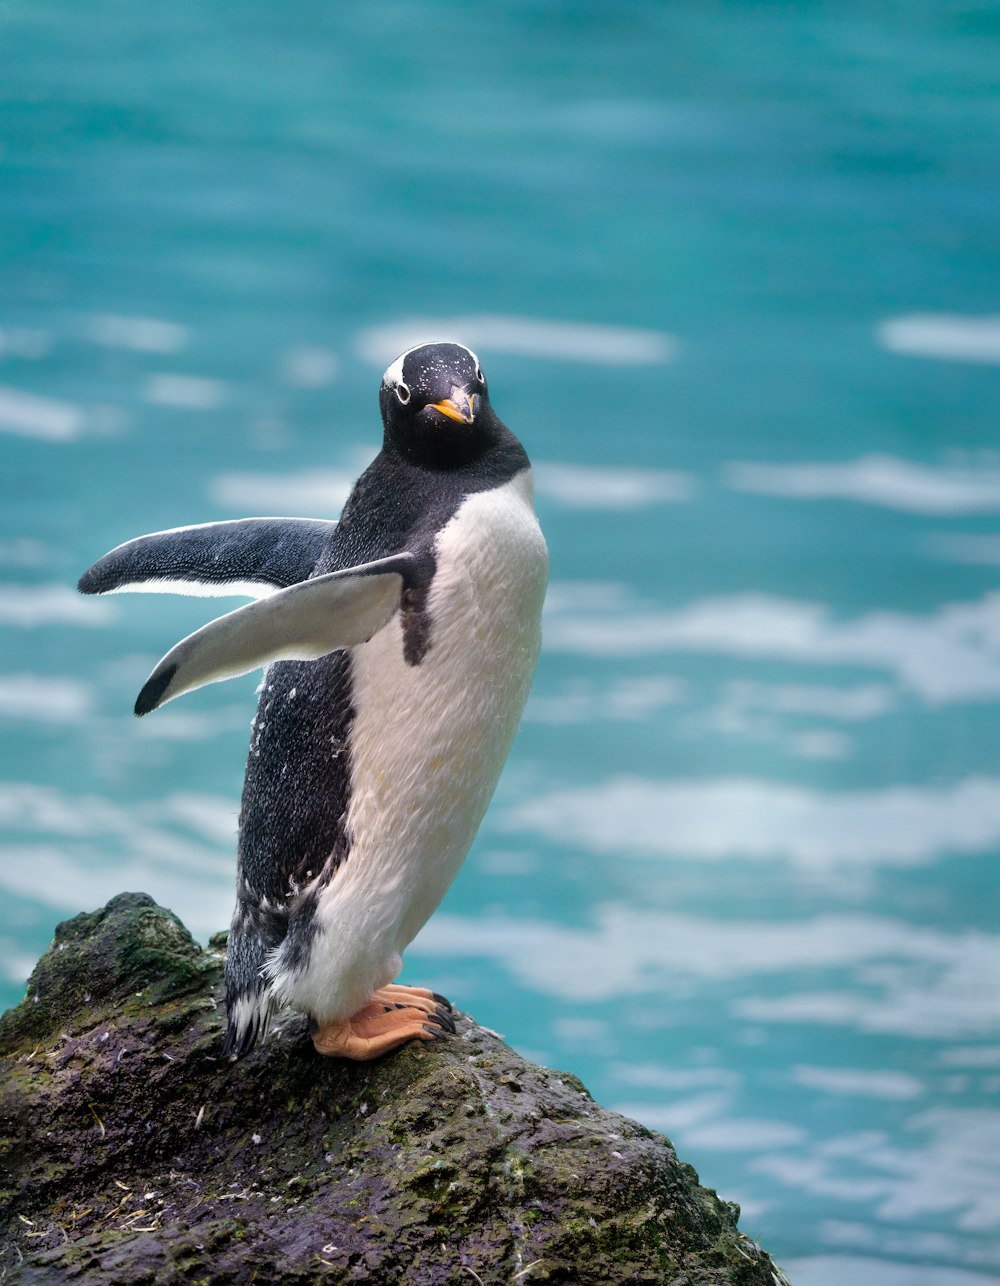 a penguin standing on a rock in the water